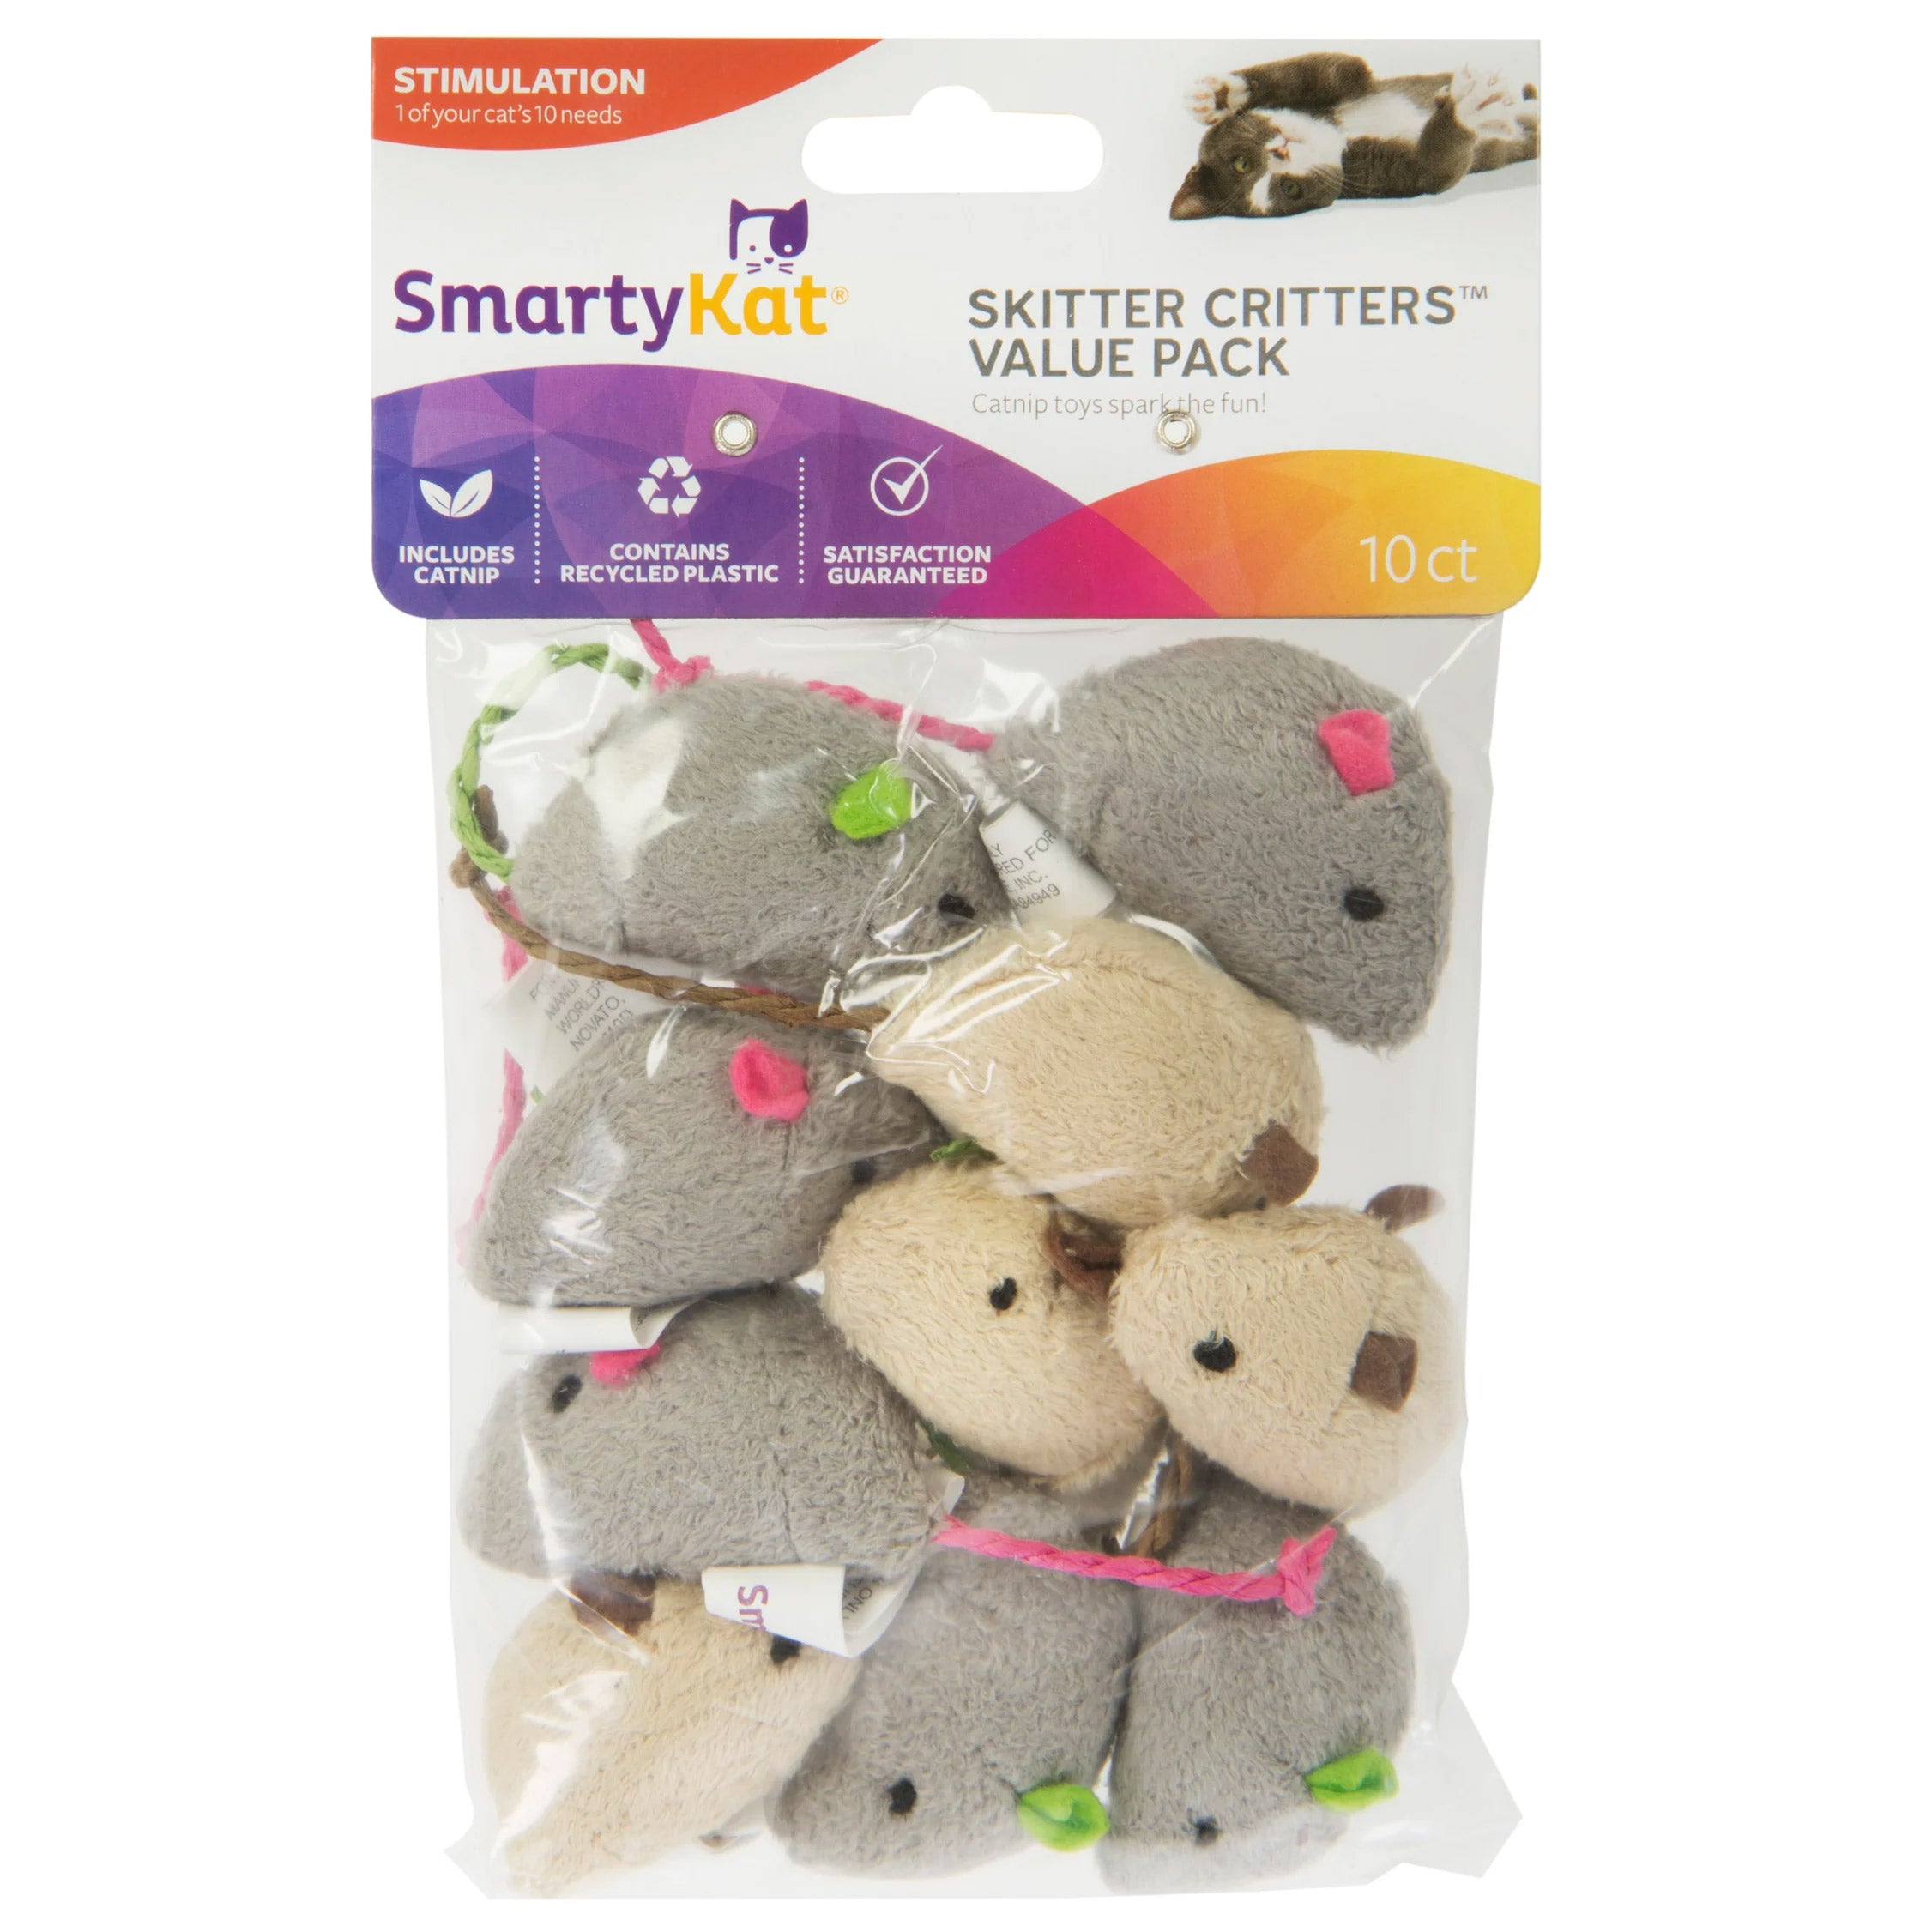 https://cdn.shopify.com/s/files/1/0533/5259/5632/products/smartyKat-skitter-critters-pack_2252x2252.jpg?v=1676658664